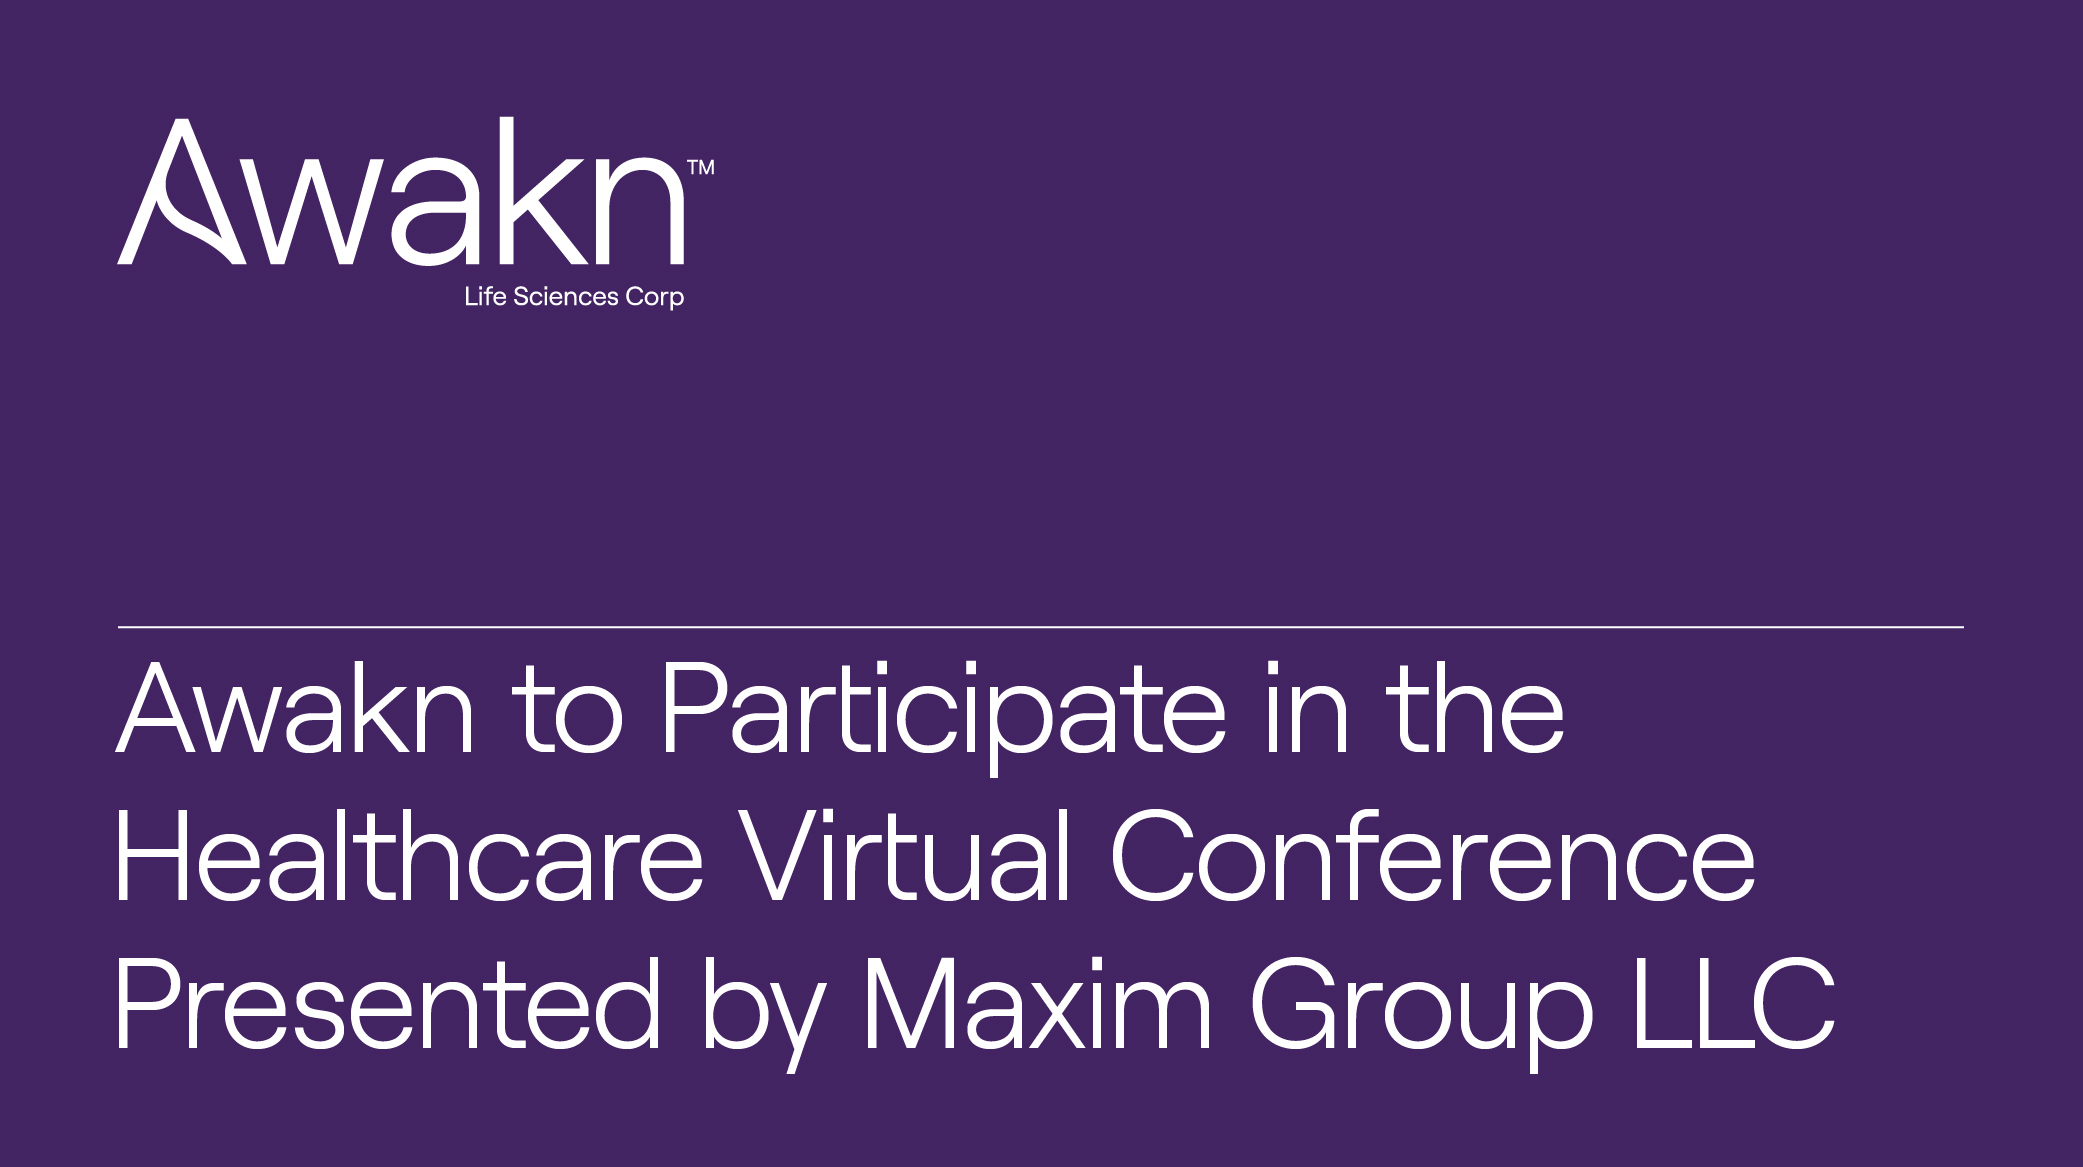 Awakn Life Sciences to Participate in the Healthcare Virtual Conference Presented by Maxim Group LLC